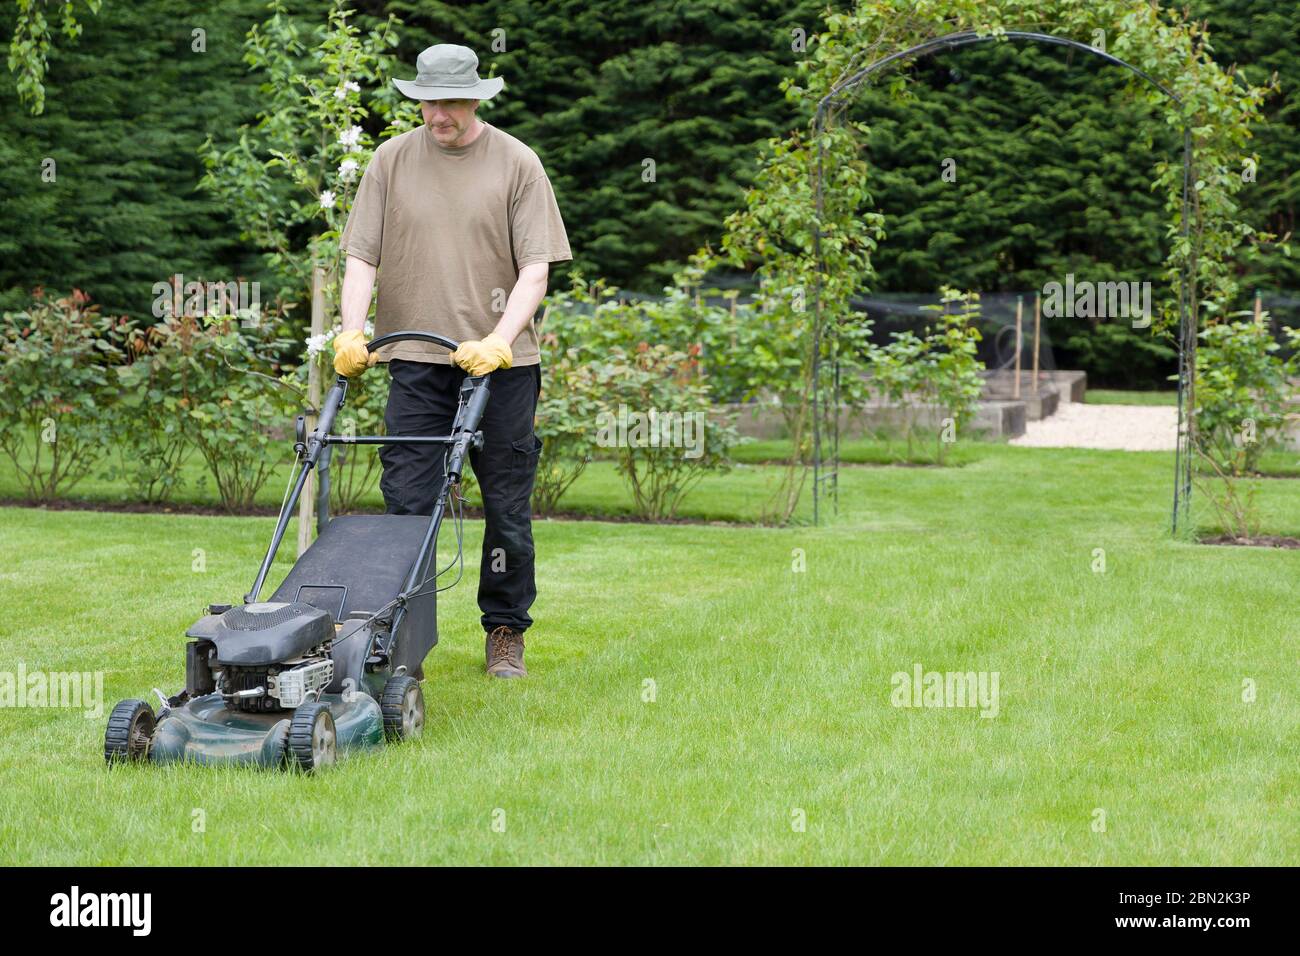 Man or gardener mowing a grass lawn in a garden in summer with a lawnmower, UK Stock Photo